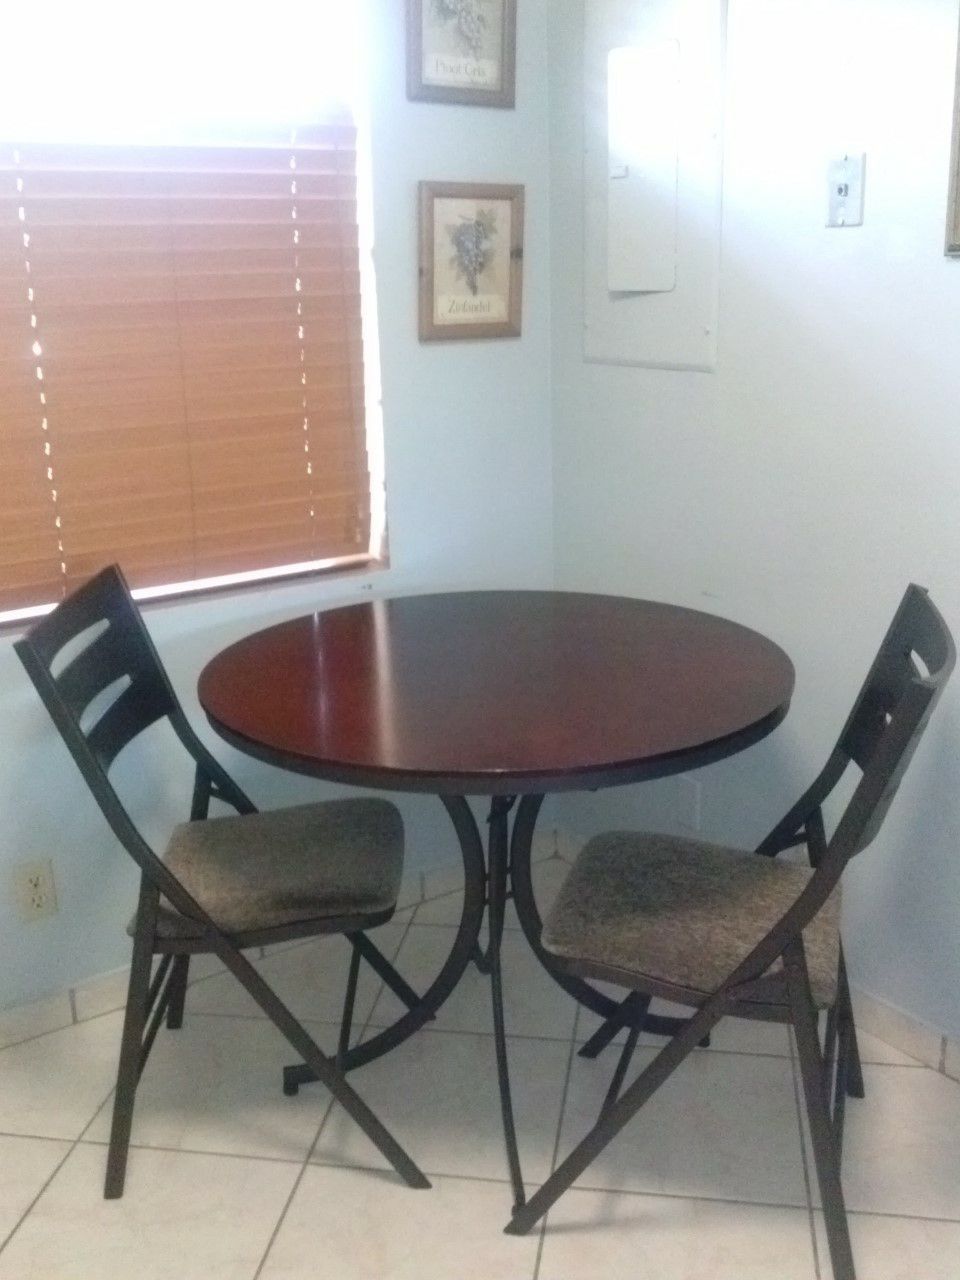 ****Round table and 2 chairs.****